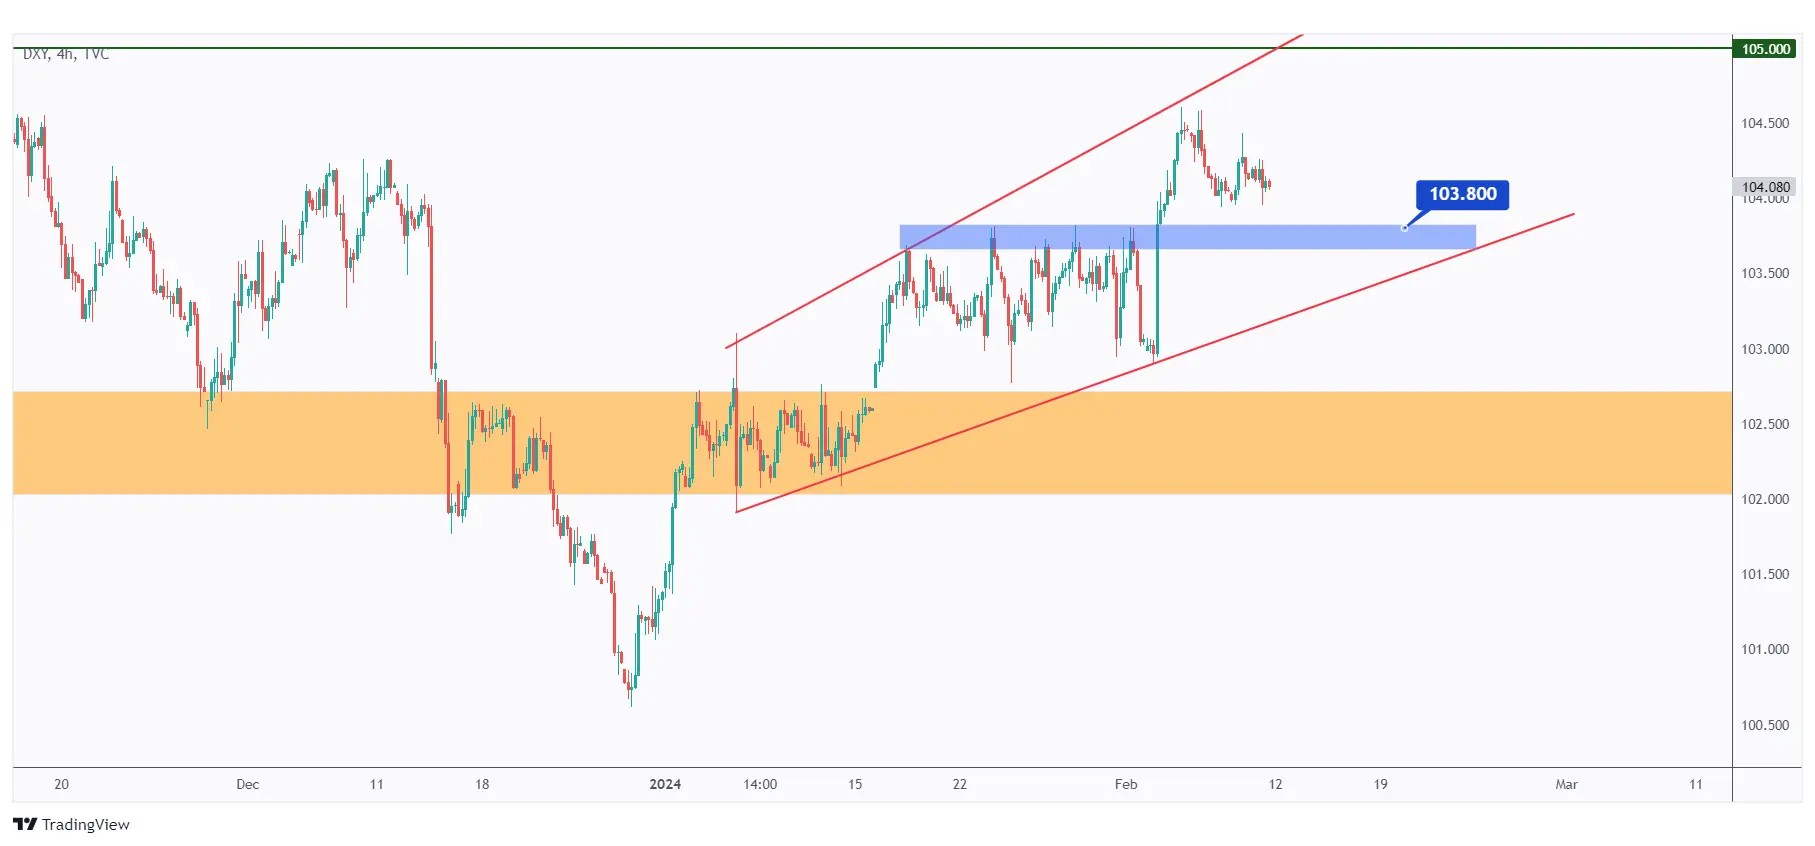 DXY 4h overall bullish trading inside the rising wedge pattern.